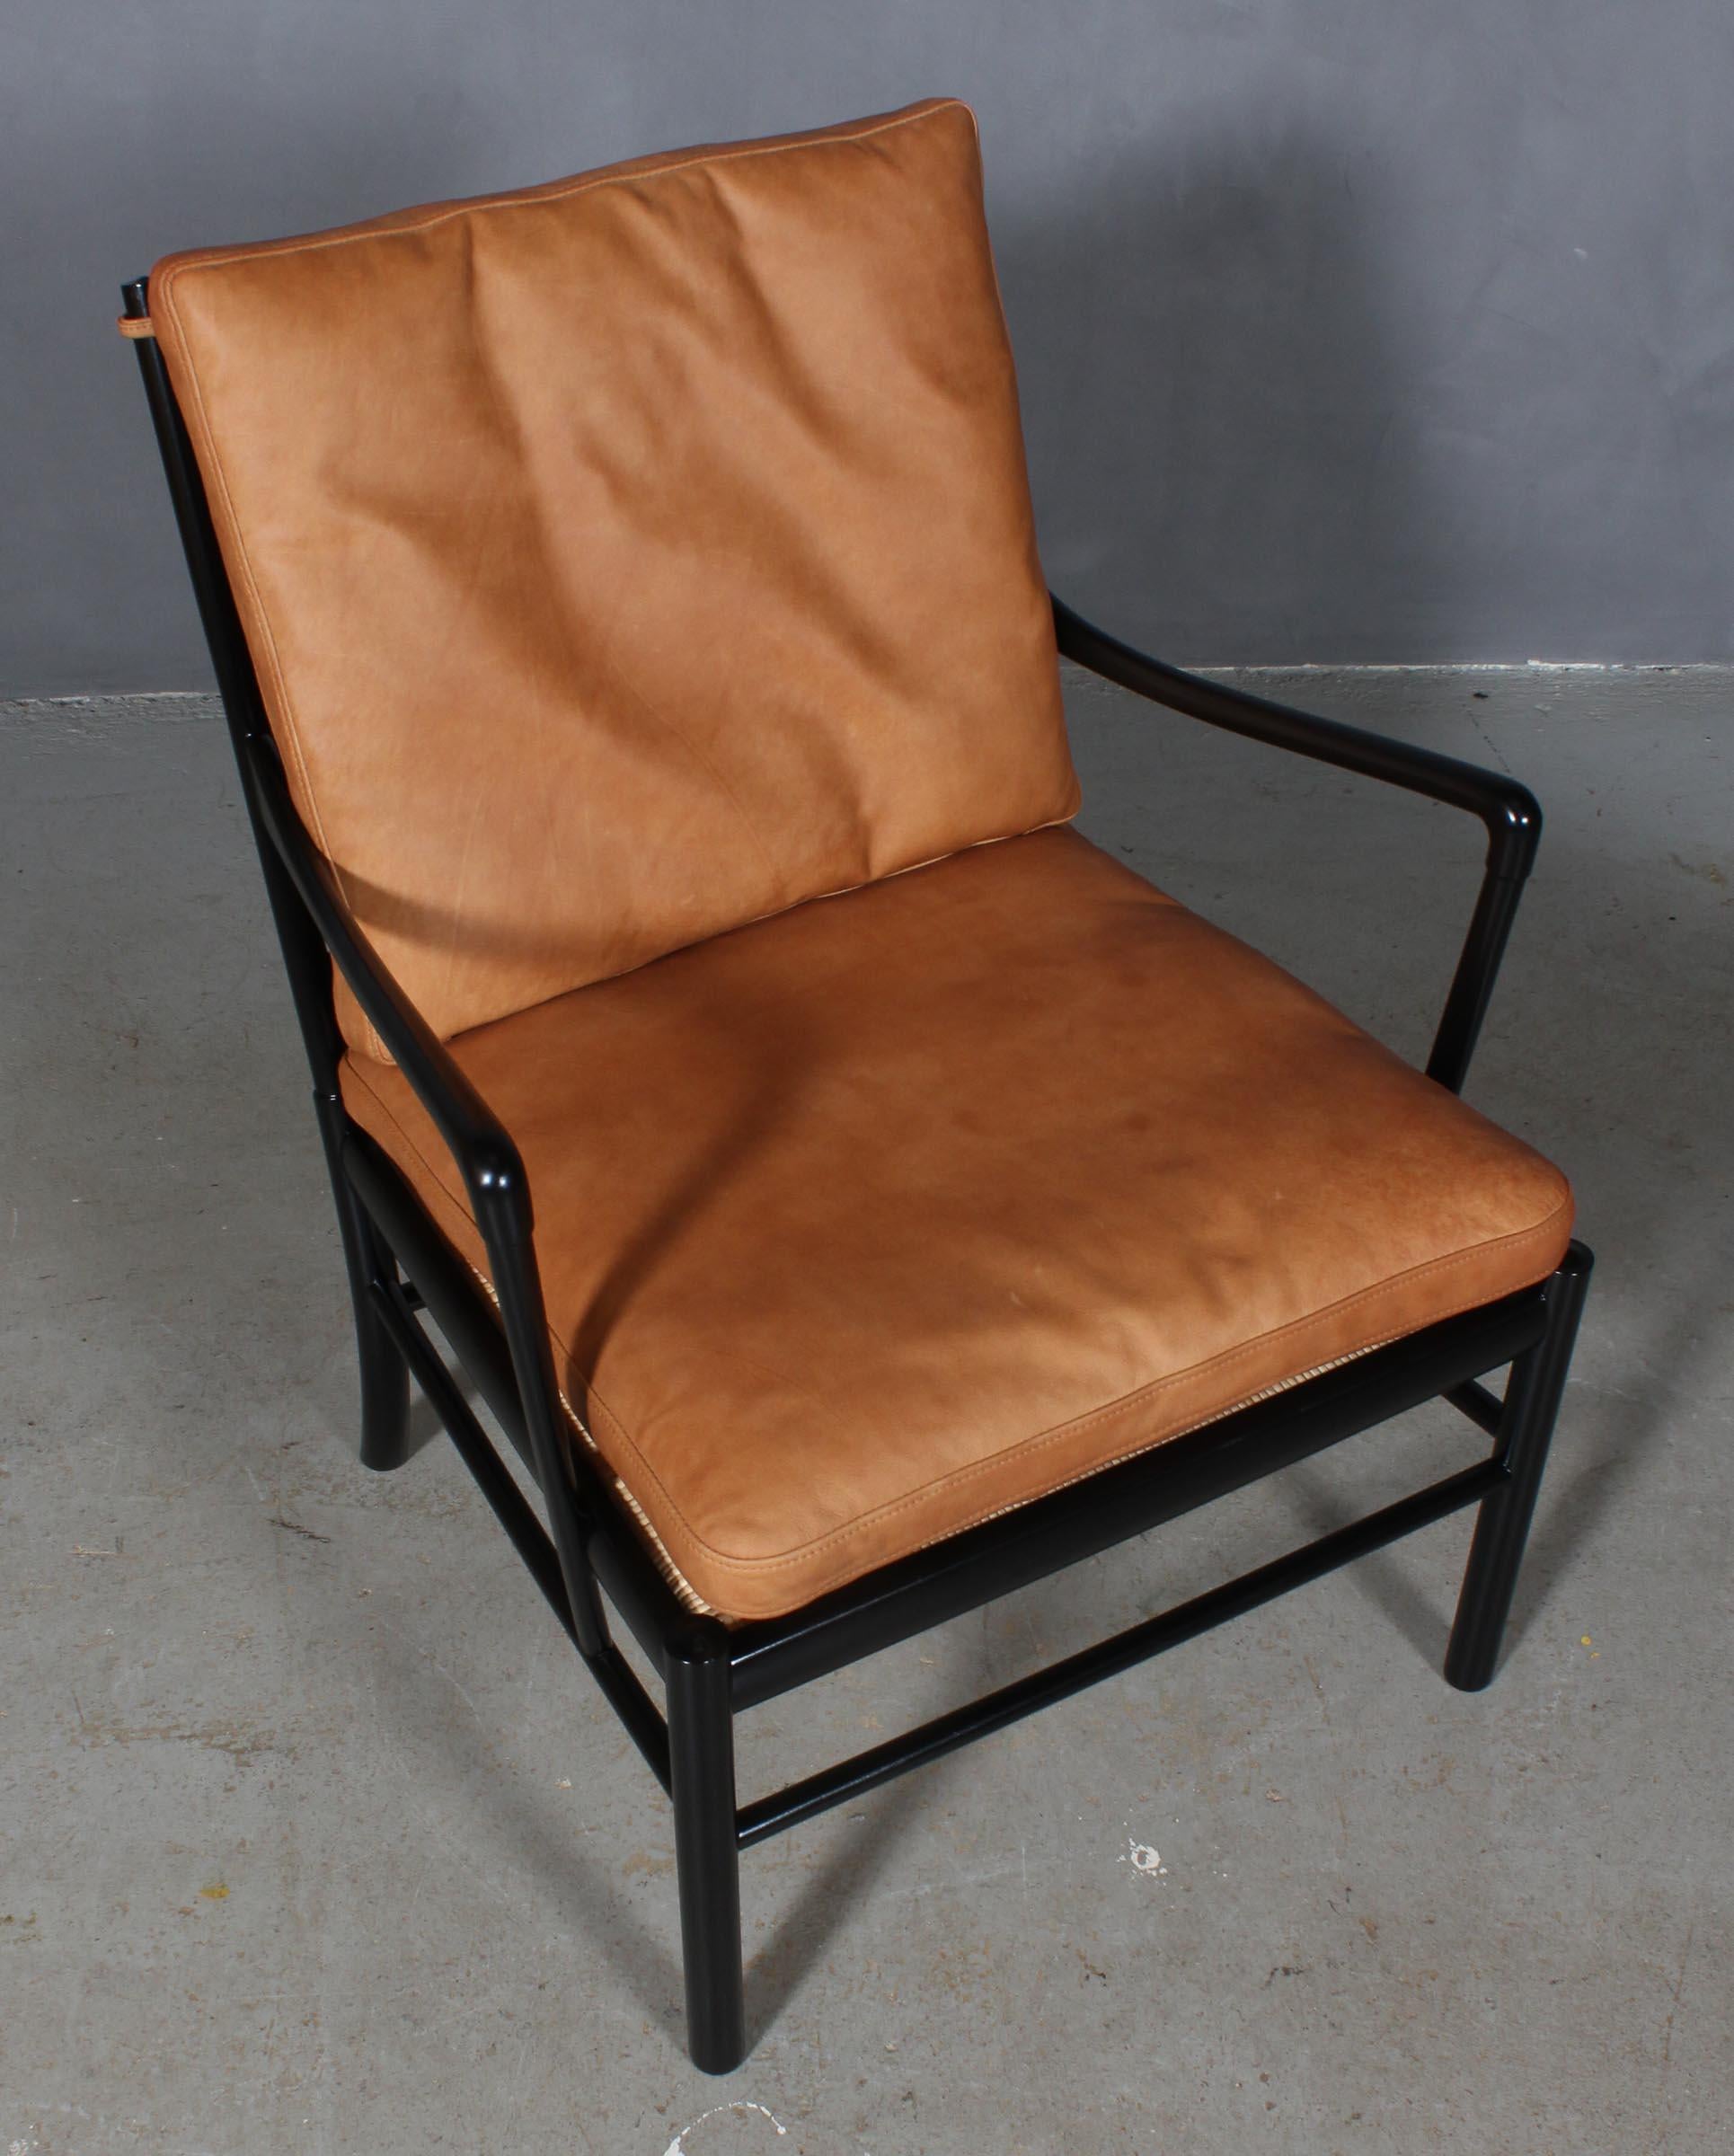 Ole Wanscher lounge chair new upholstered with cognac vintage aniline leather.

Made in new black laquered mahogany. 

Model colonial chair, made by Poul Jeppesen.